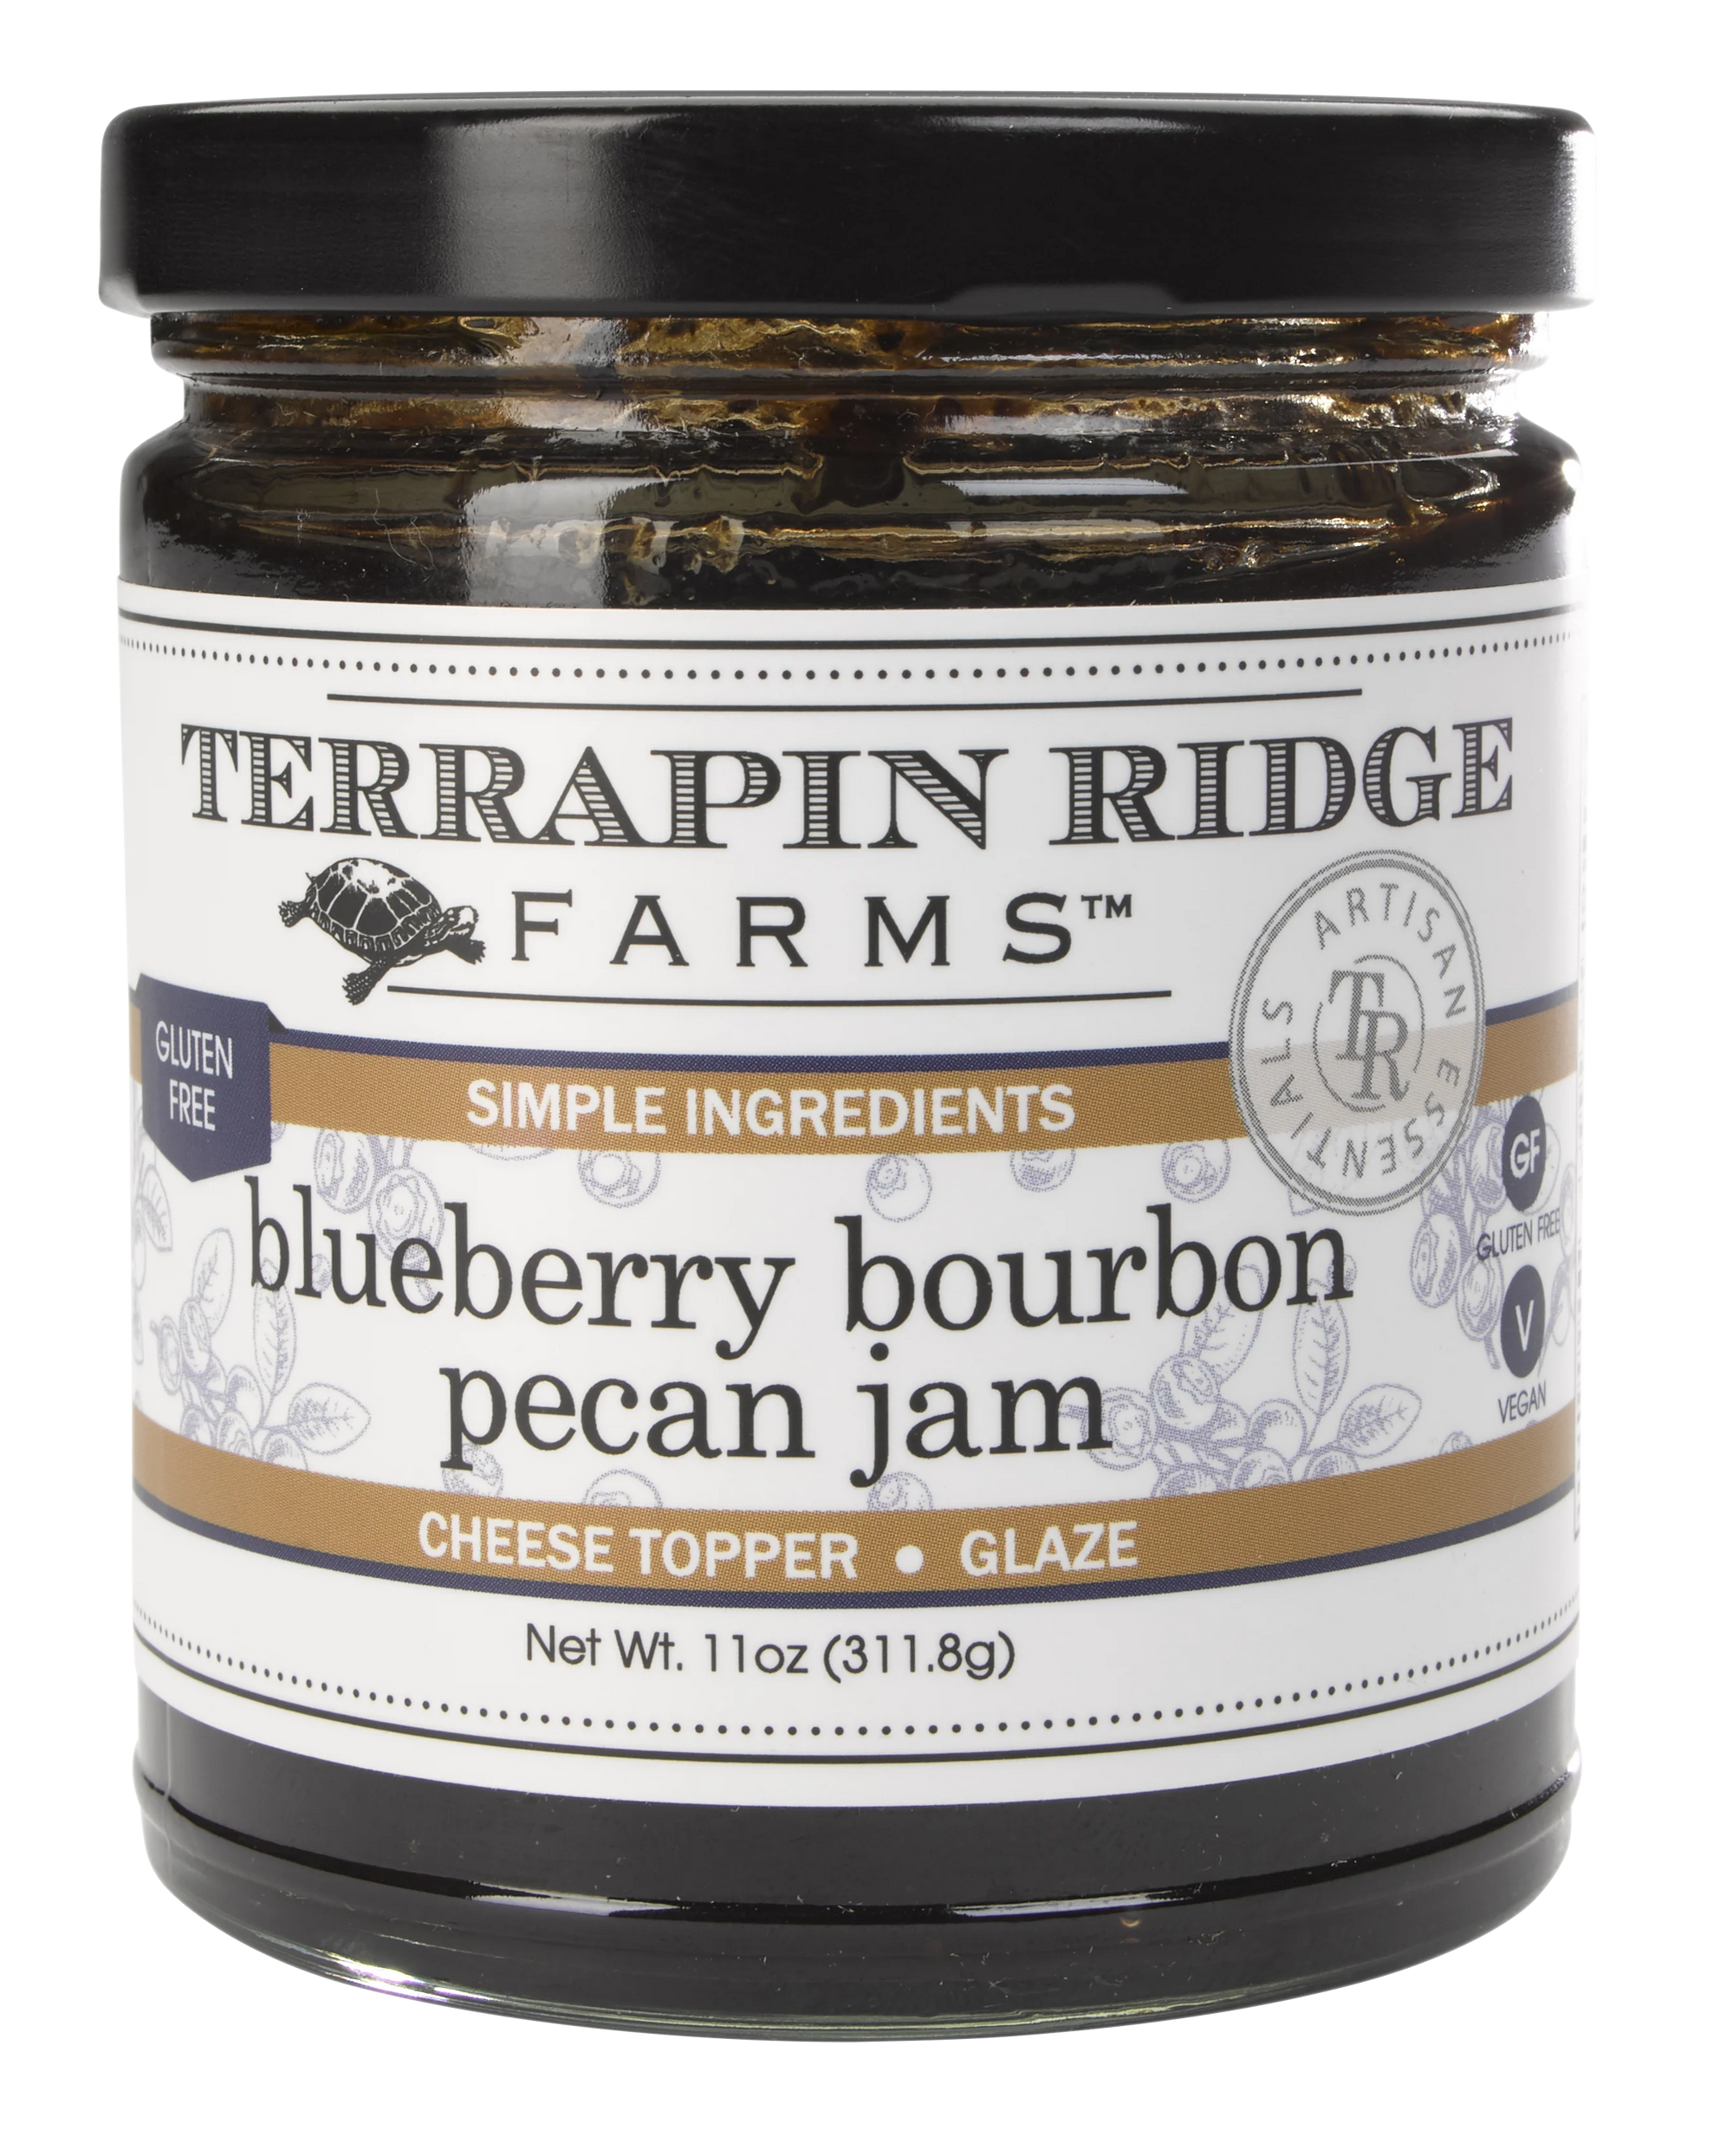 Terrapin Ridge Farms offers the delectable Terrapin Ridge Blueberry Bourbon Pecan Jam that is gluten-free and tantalizingly infused with hints of apples and cinnamon. Indulge in this unique flavor.